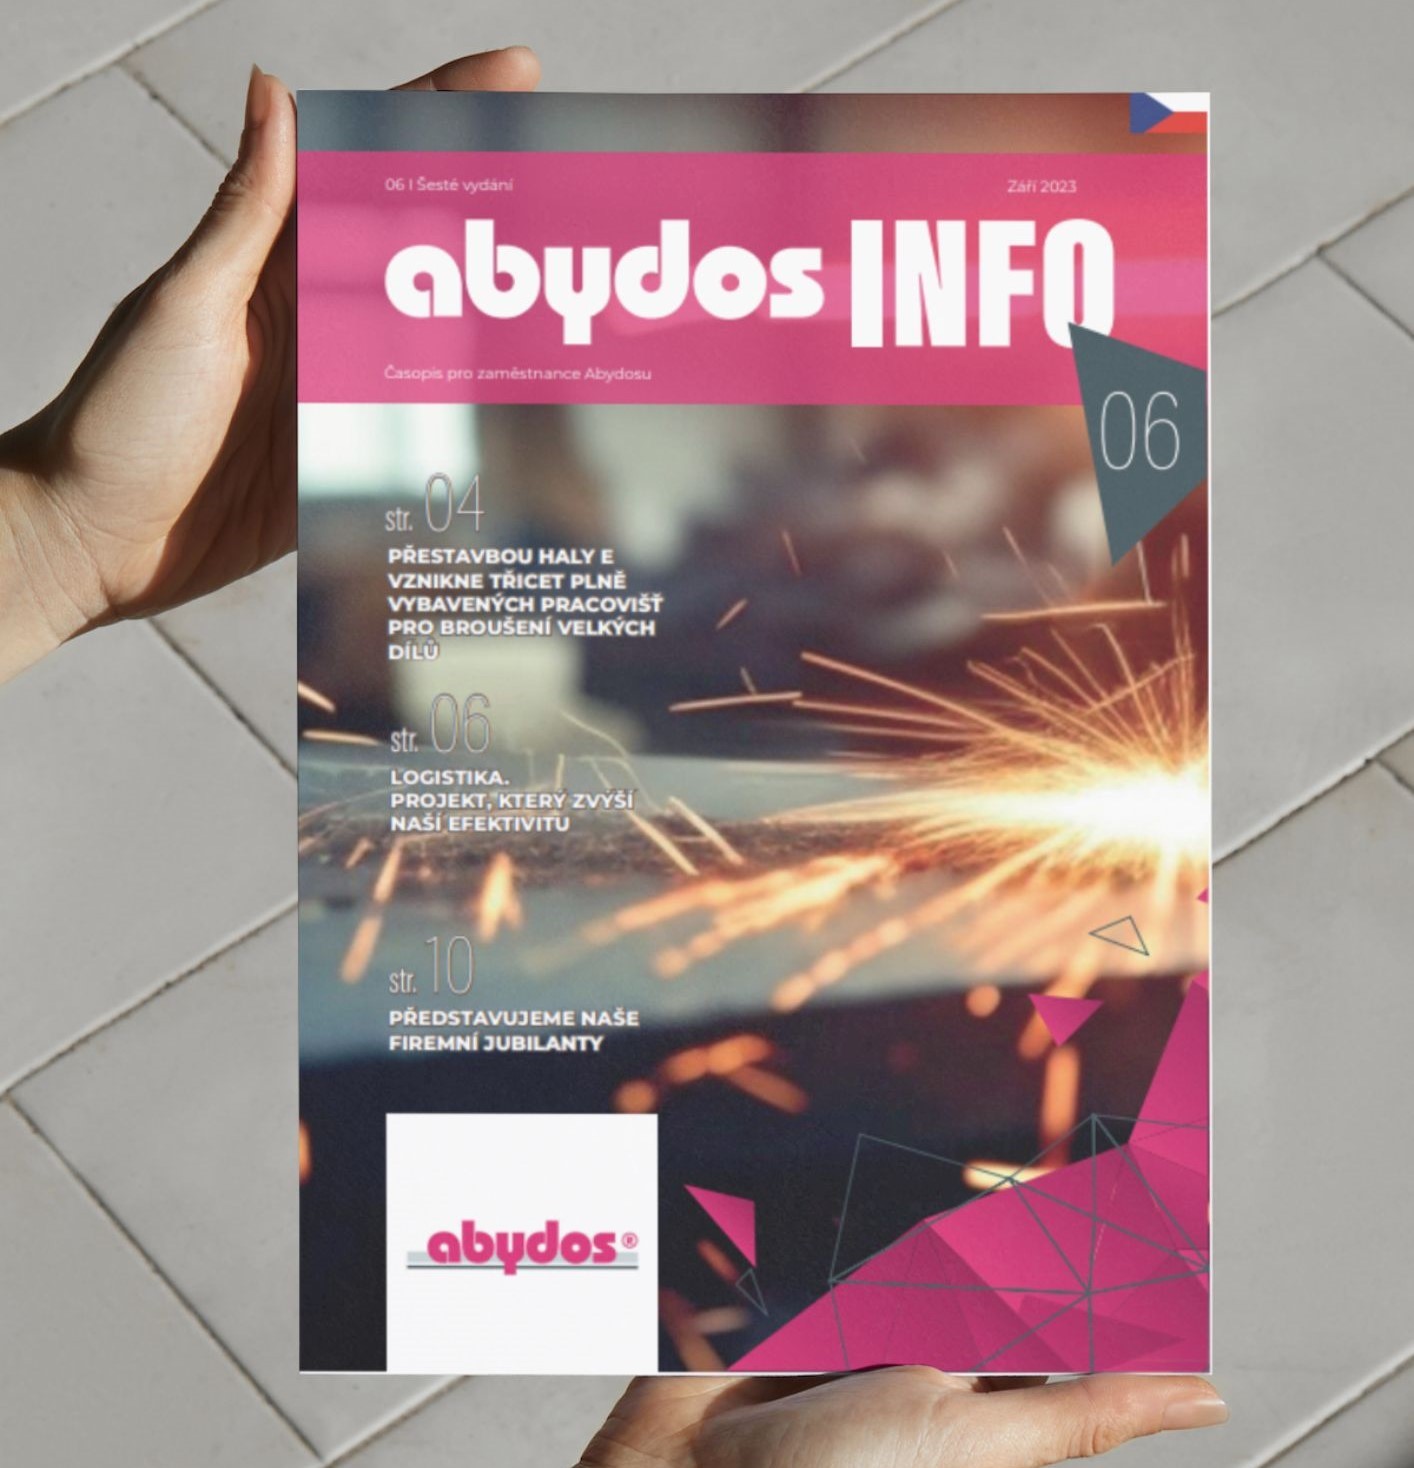 New issue of the company magazine Abydos Info